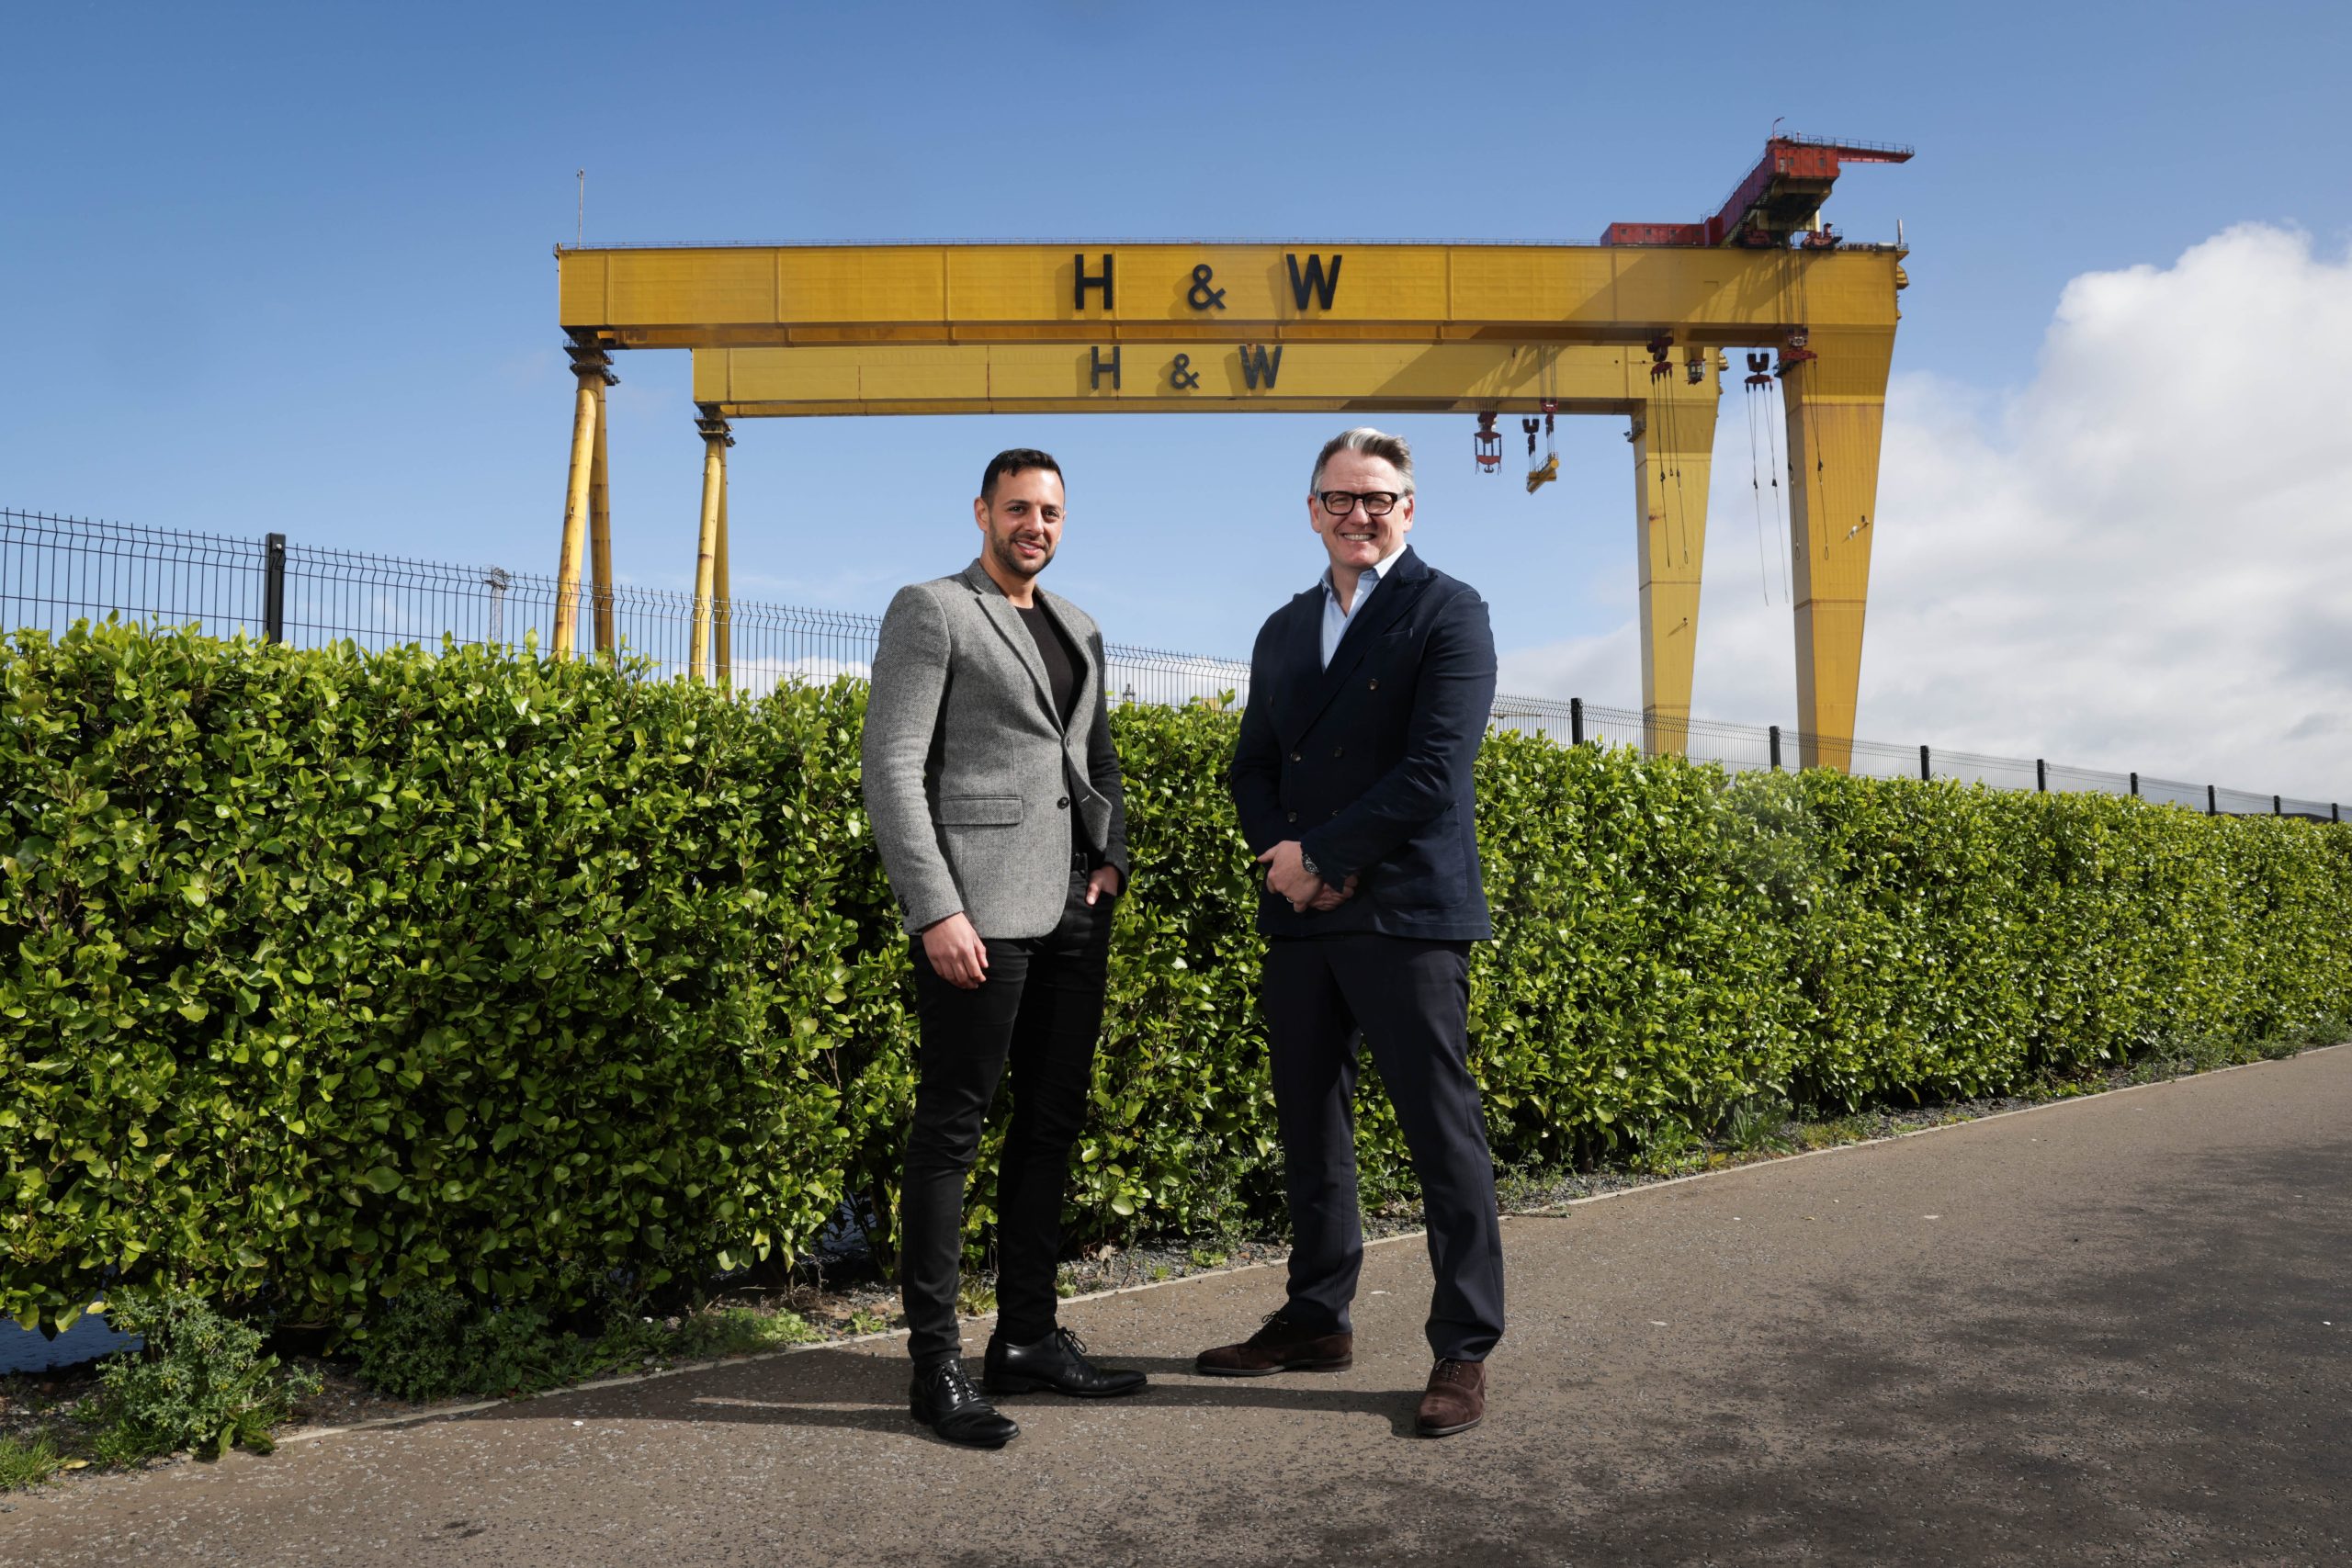 Cavendish acquisition expands reach into Belfast and Dublin